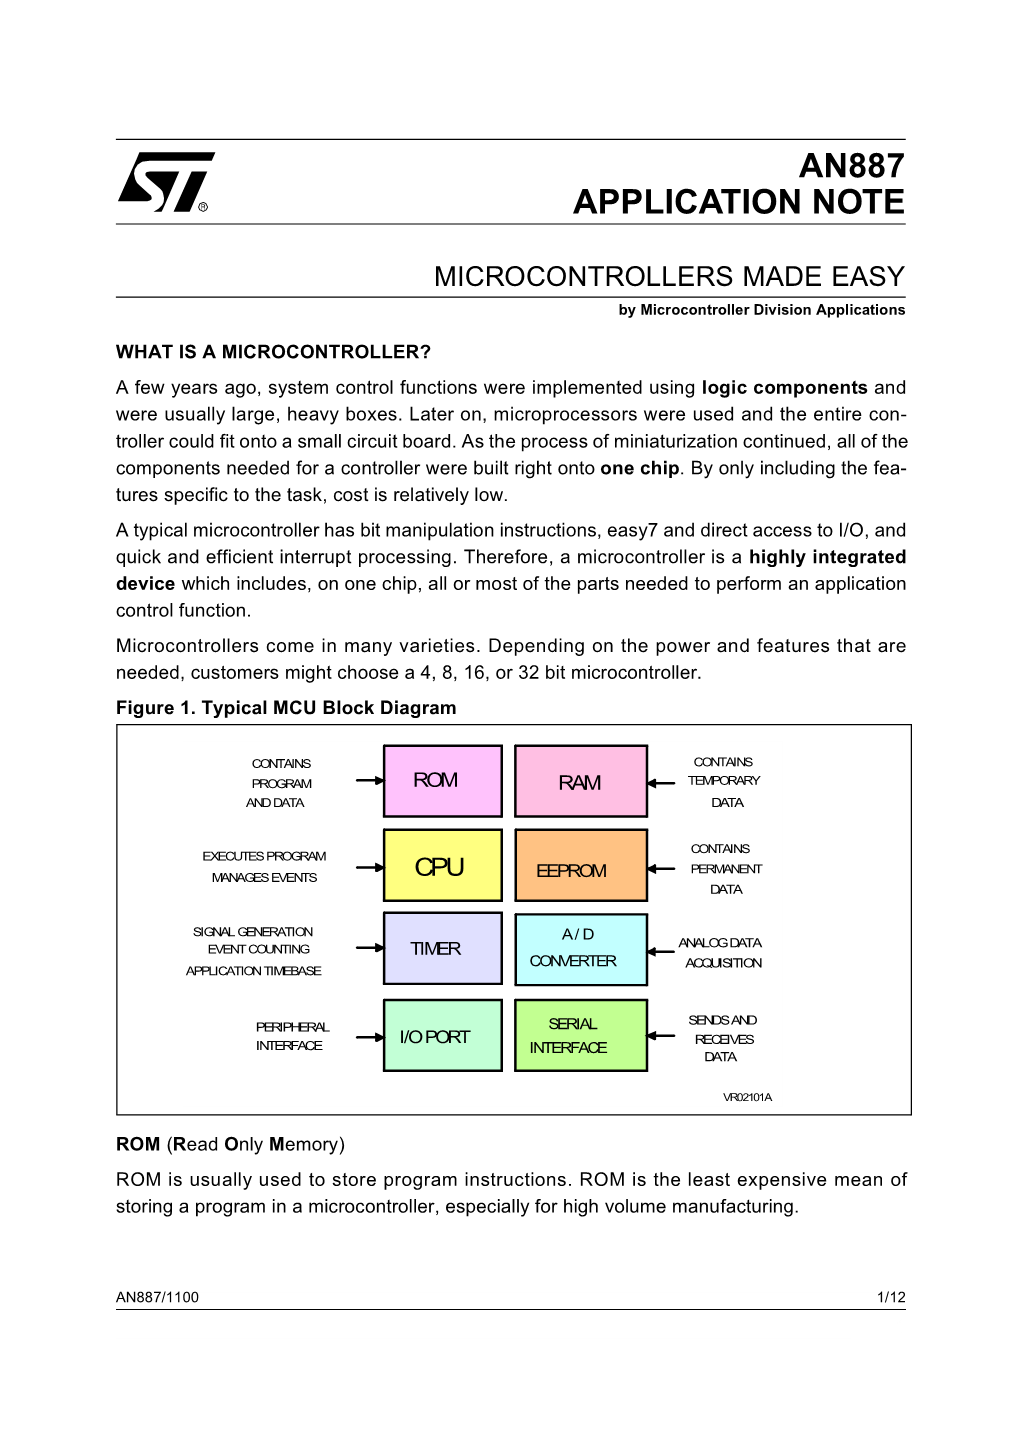 MICROCONTROLLERS MADE EASY by Microcontroller Division Applications